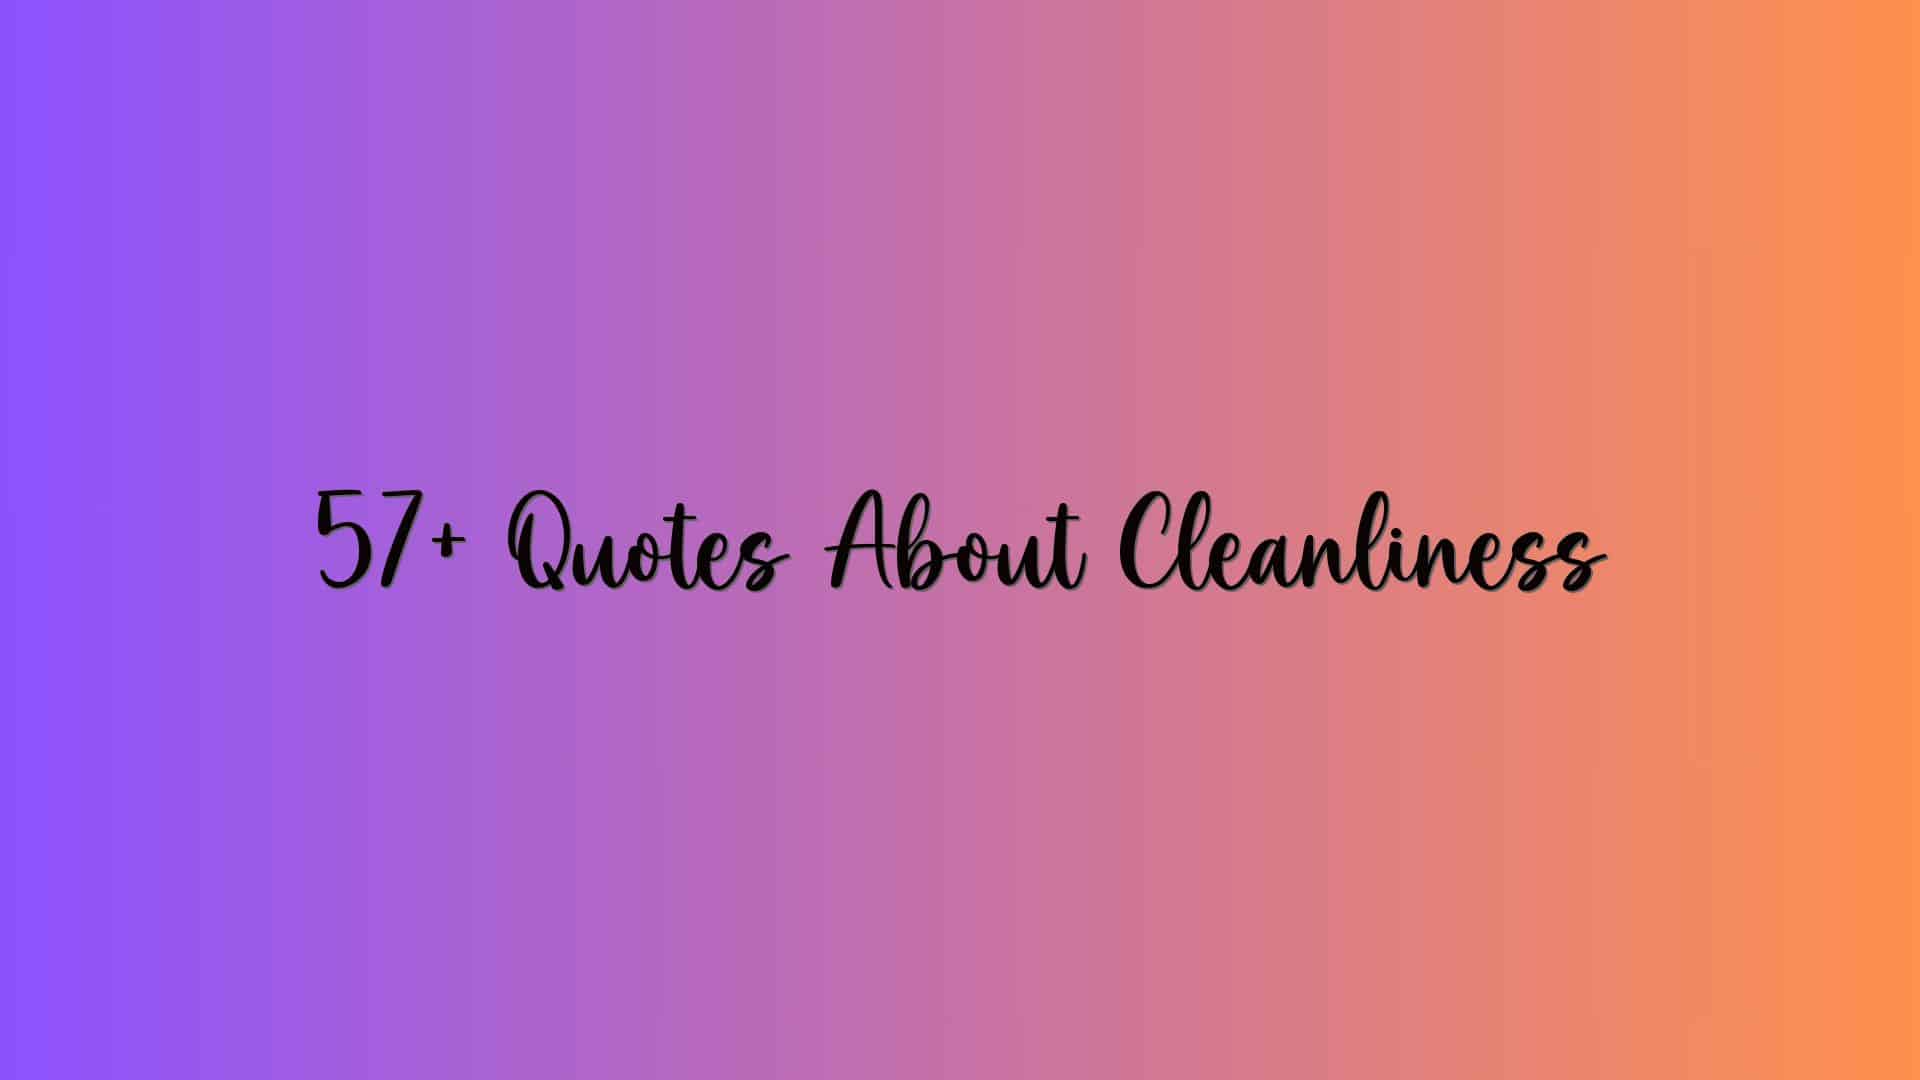 57+ Quotes About Cleanliness